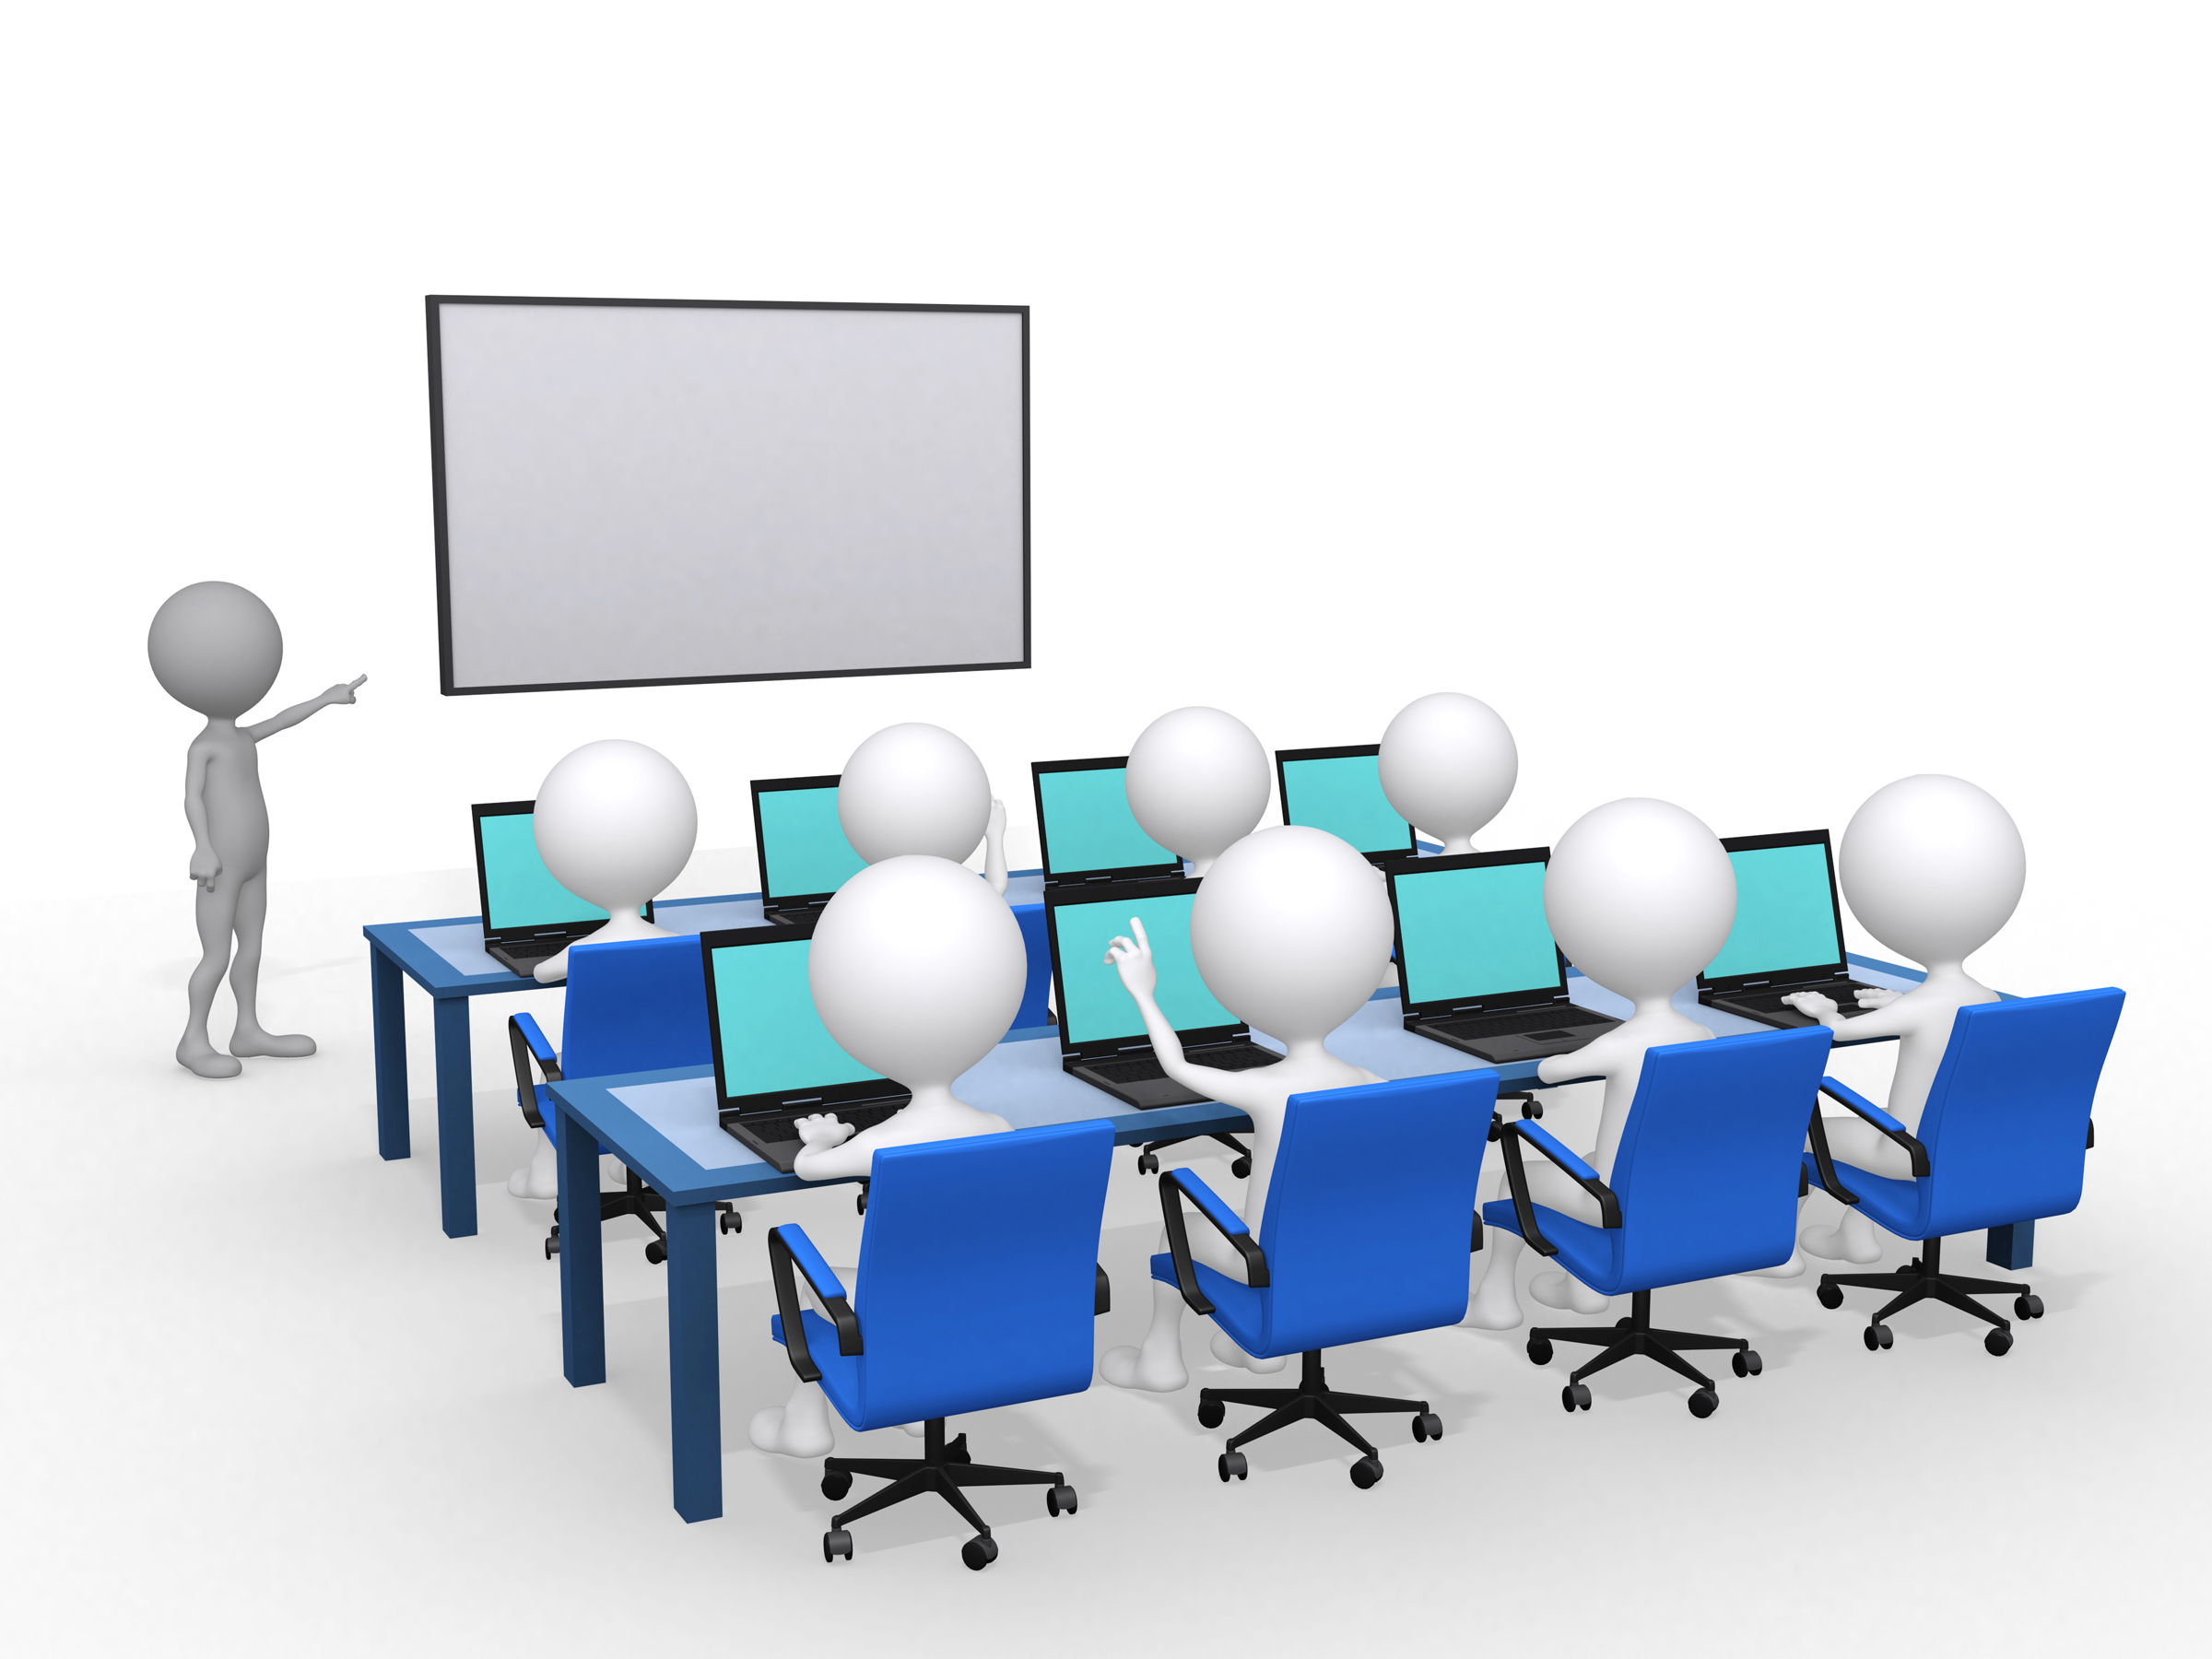 online training clipart - photo #15